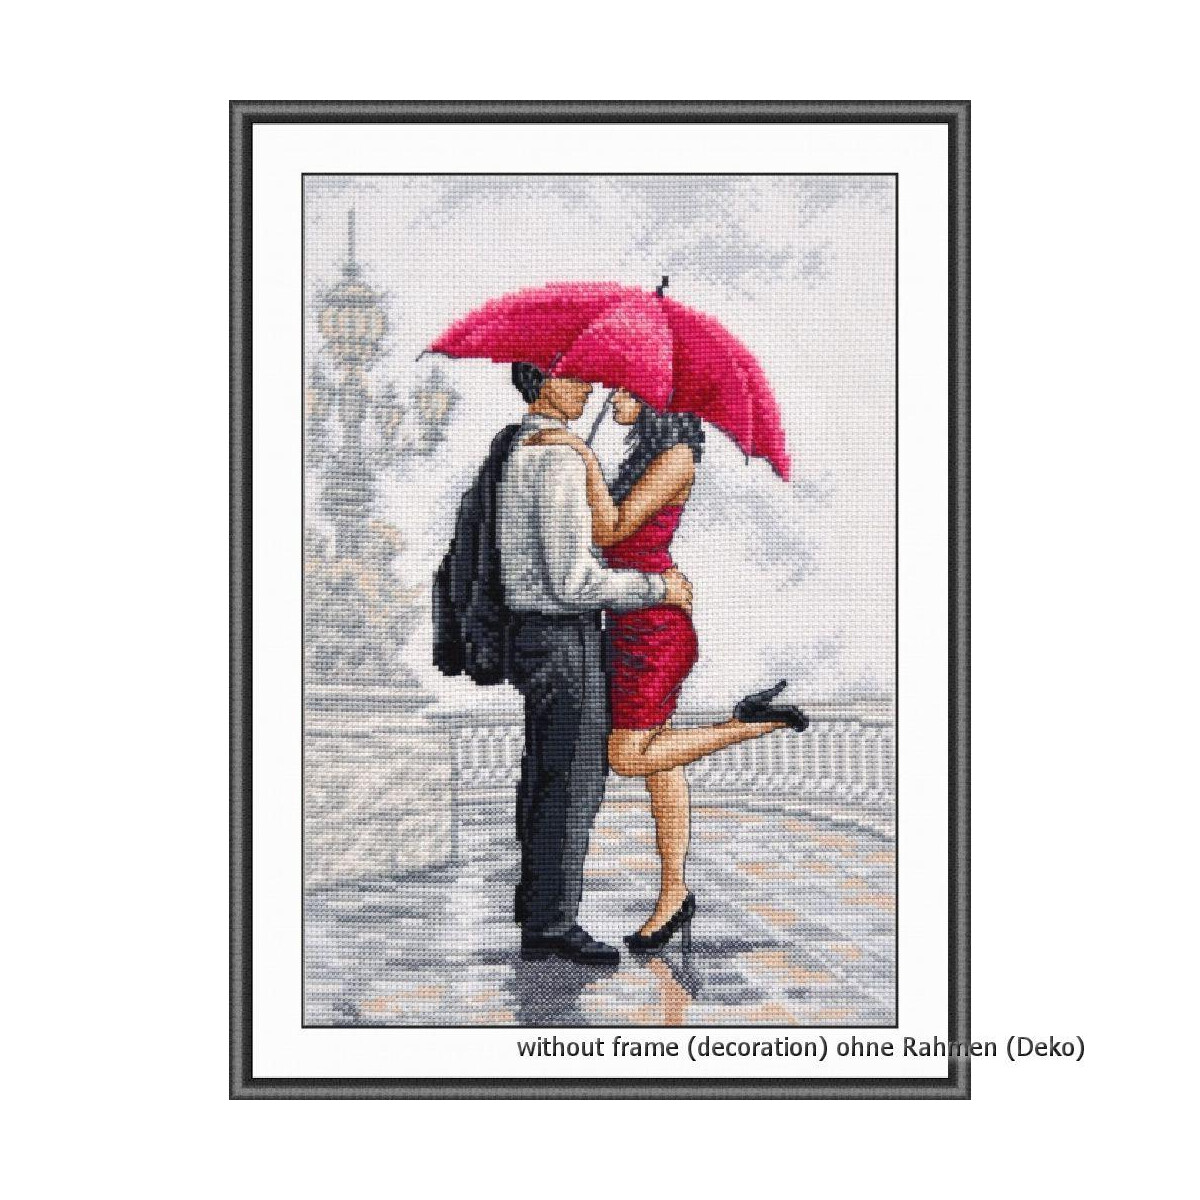 Oven counted cross stitch kit "In rain",...